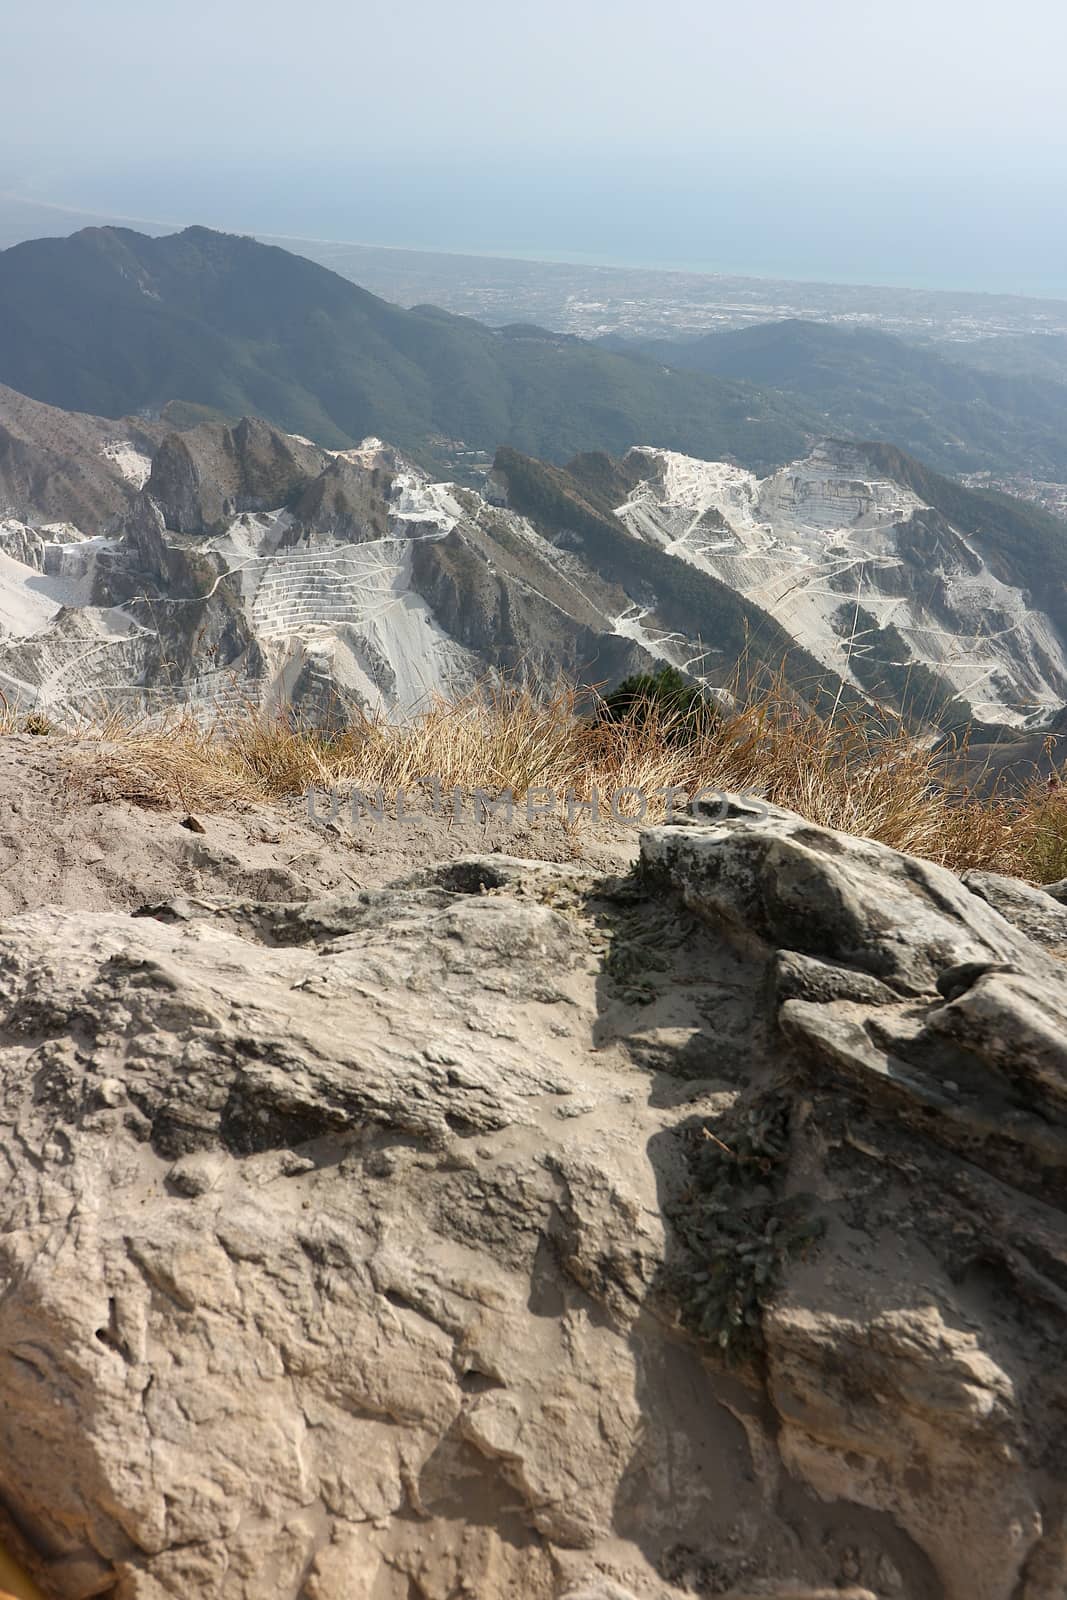 Panorama of the white marble quarries of Carrara on the Apuan Al by Paolo_Grassi